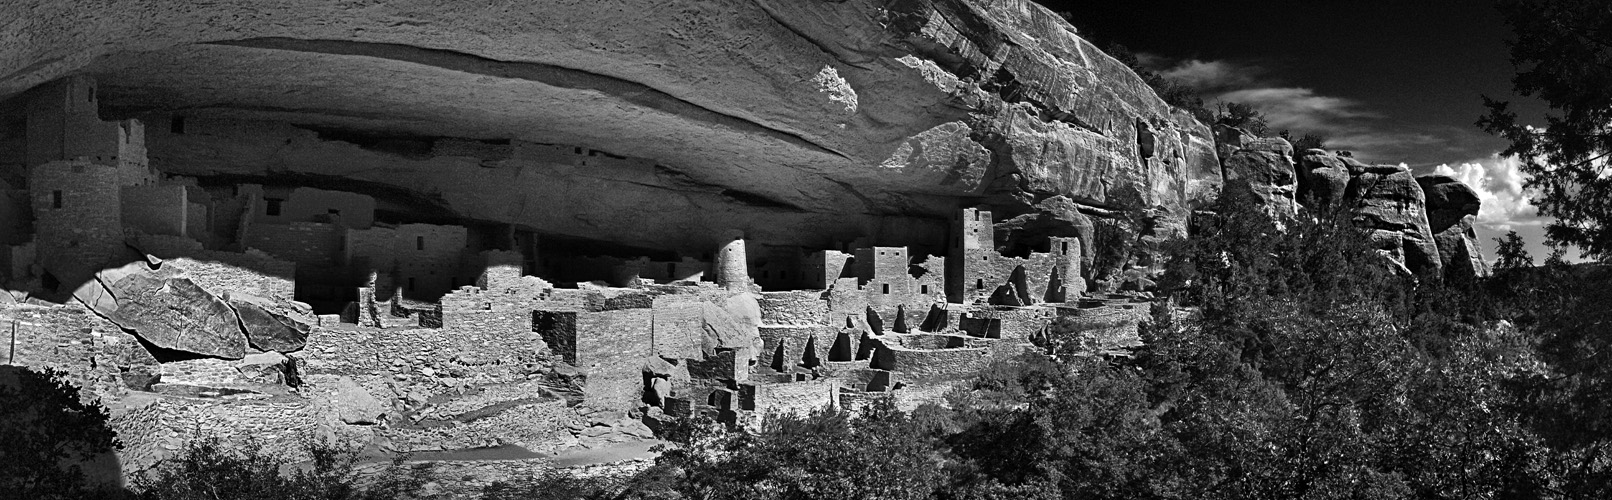 Cliff Palace s/w